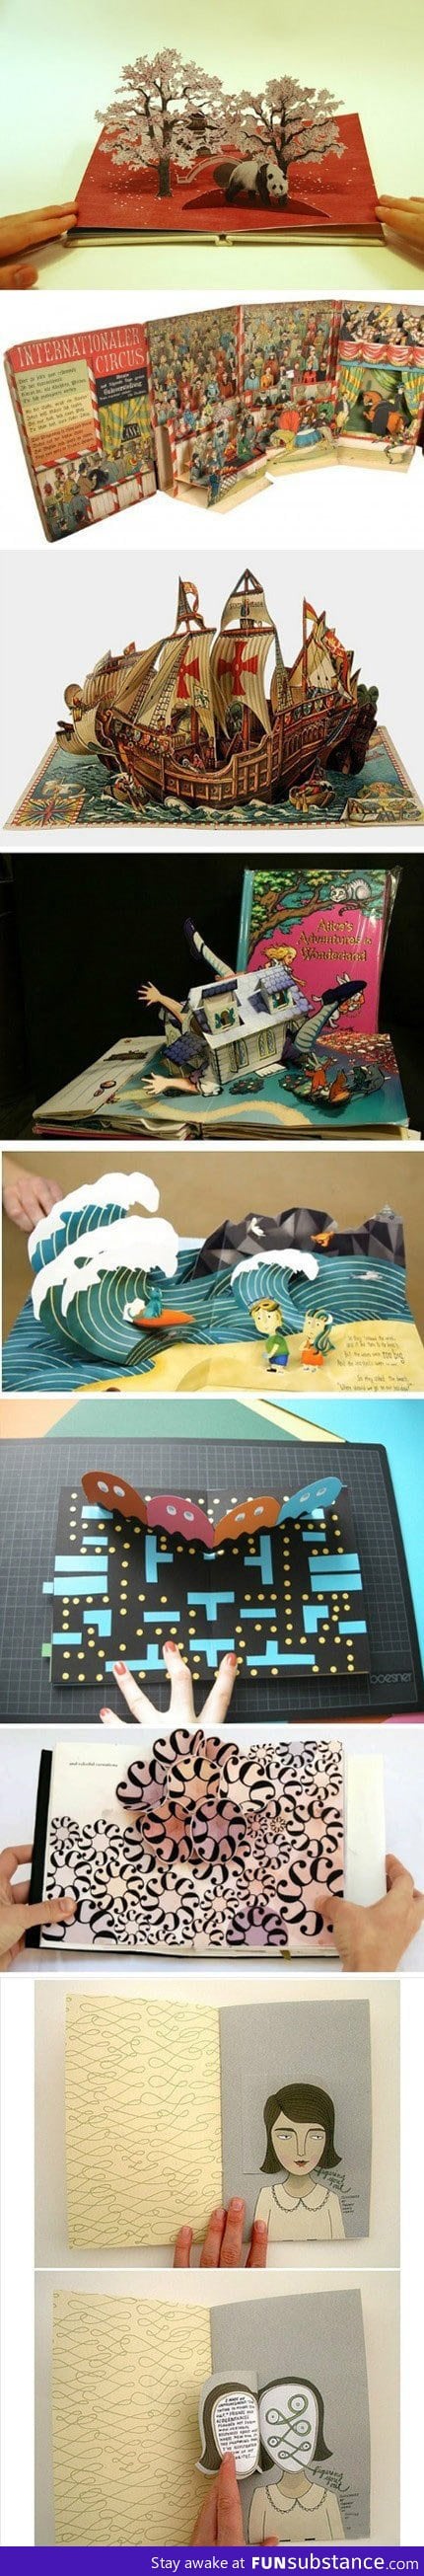 And this is why pop-up books are awesome